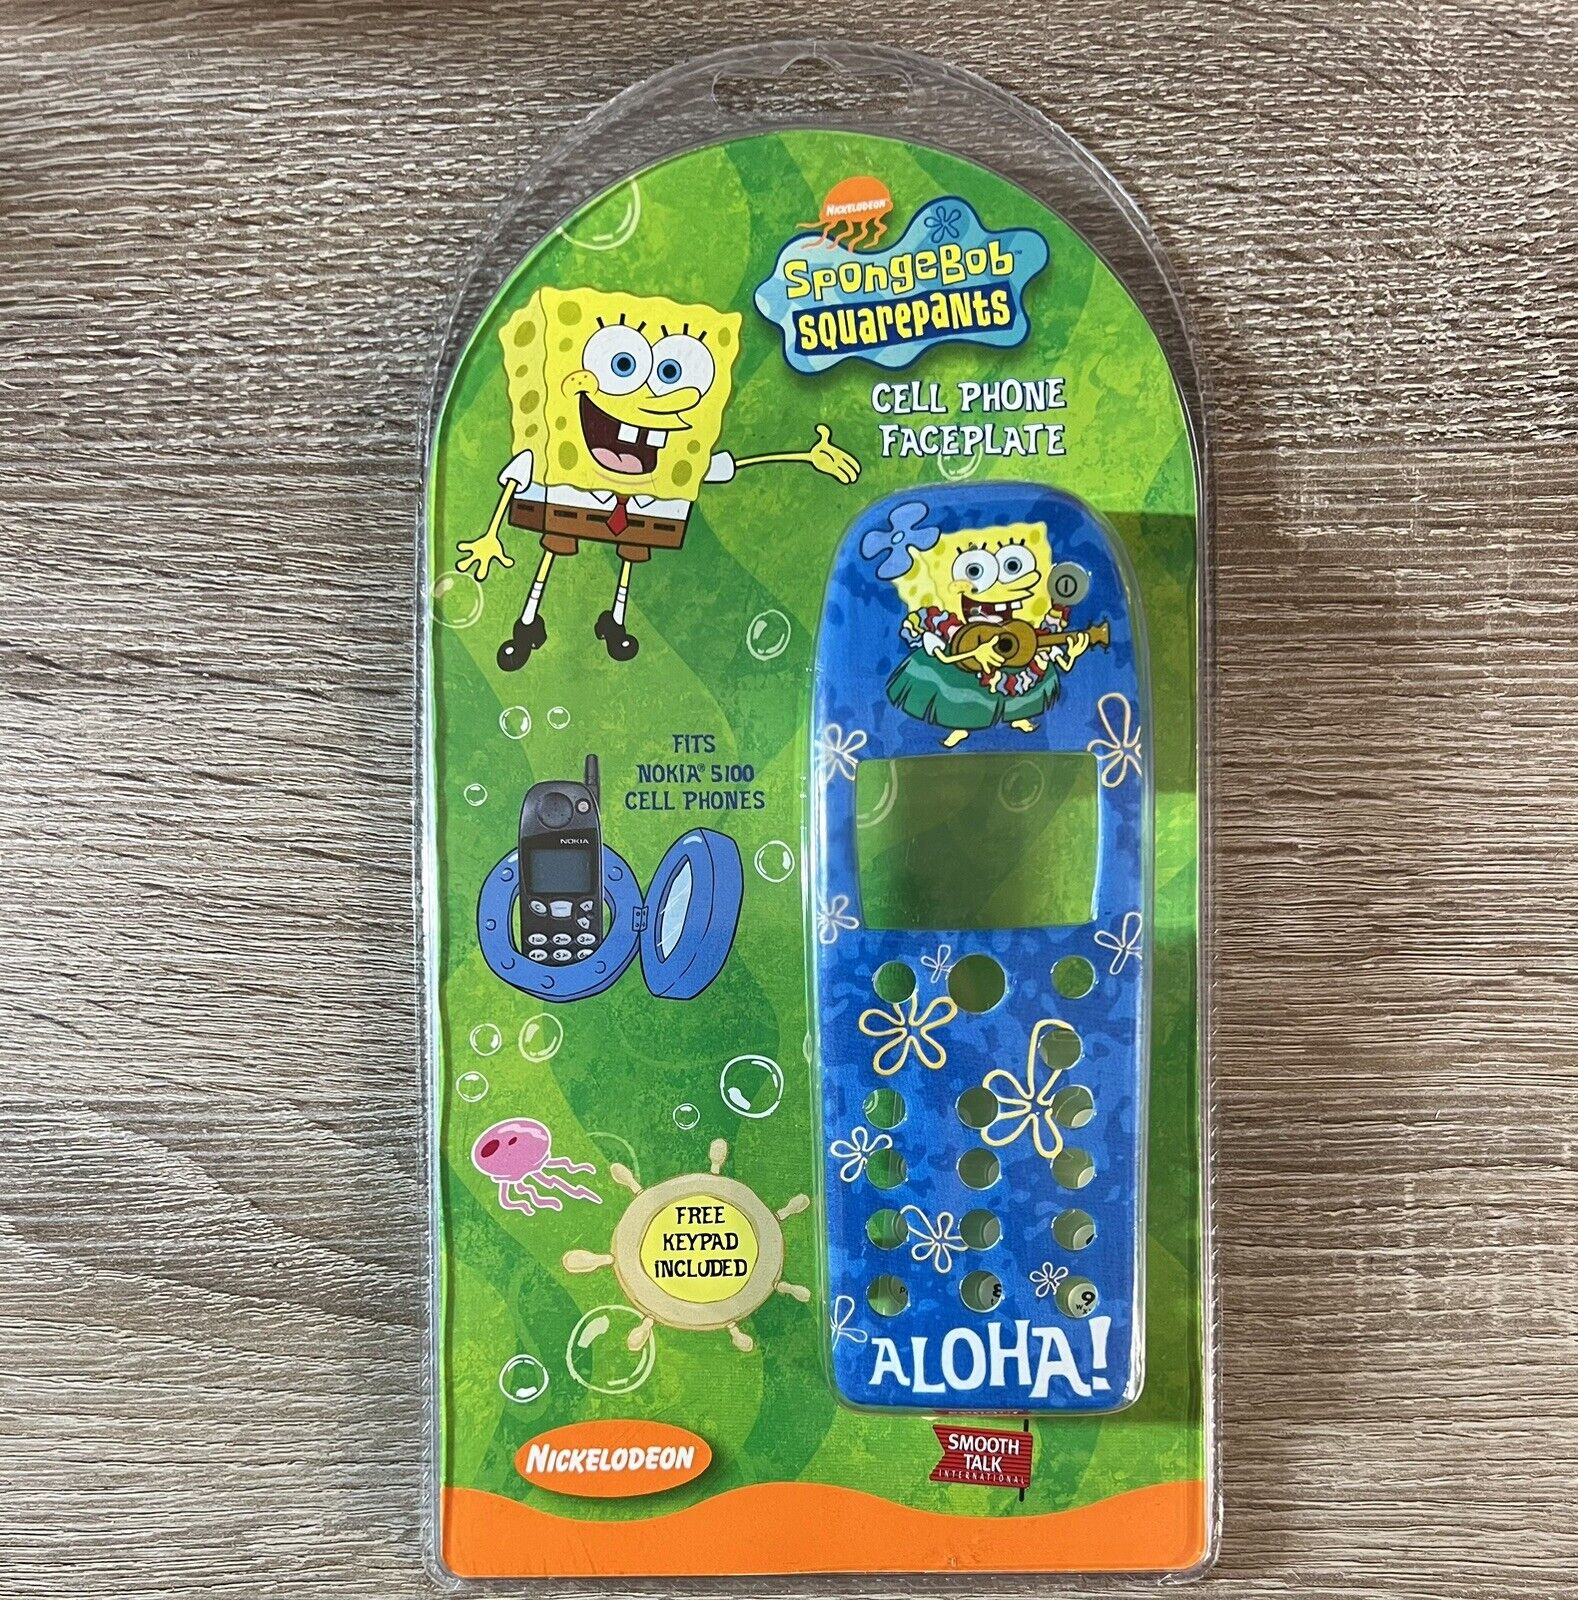 SpongeBob SquarePants Nickelodeon cell phone faceplate New Collectors Find